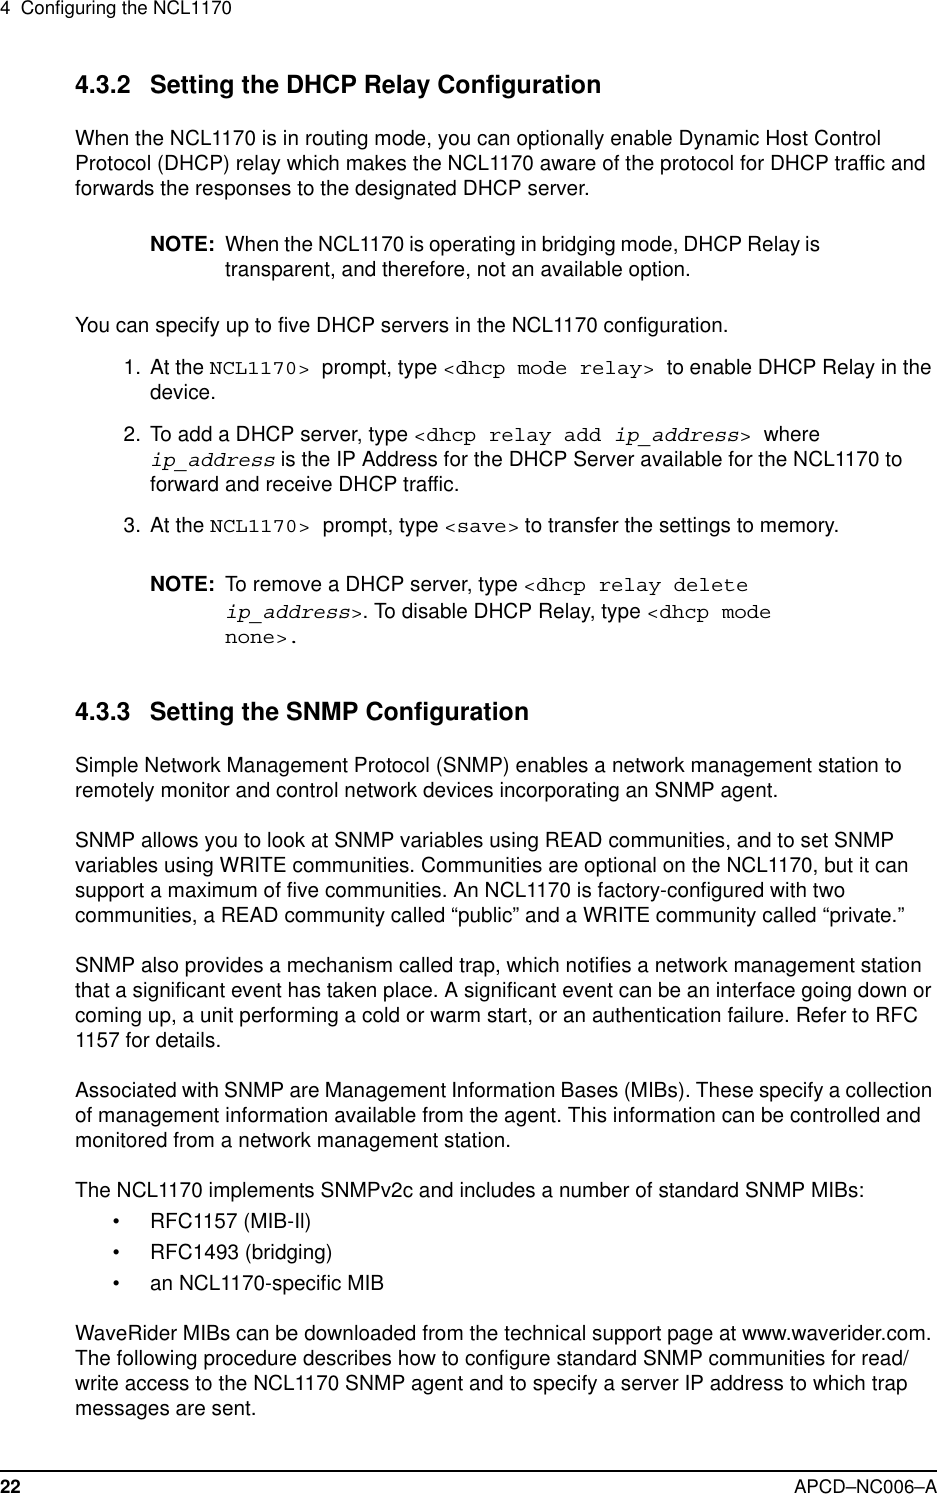 4 Configuring the NCL117022 APCD–NC006–A4.3.2 Setting the DHCP Relay ConfigurationWhen the NCL1170 is in routing mode, you can optionally enable Dynamic Host ControlProtocol (DHCP) relay which makes the NCL1170 aware of the protocol for DHCP traffic andforwards the responses to the designated DHCP server.NOTE: When the NCL1170 is operating in bridging mode, DHCP Relay istransparent, and therefore, not an available option.You can specify up to five DHCP servers in the NCL1170 configuration.1. At the NCL1170&gt; prompt, type &lt;dhcp mode relay&gt; to enable DHCP Relay in thedevice.2. To add a DHCP server, type &lt;dhcp relay add ip_address&gt;whereip_address is the IP Address for the DHCP Server available for the NCL1170 toforward and receive DHCP traffic.3. At the NCL1170&gt; prompt, type &lt;save&gt; to transfer the settings to memory.NOTE: To remove a DHCP server, type &lt;dhcp relay deleteip_address&gt;. To disable DHCP Relay, type &lt;dhcp modenone&gt;.4.3.3 Setting the SNMP ConfigurationSimple Network Management Protocol (SNMP) enables a network management station toremotely monitor and control network devices incorporating an SNMP agent.SNMP allows you to look at SNMP variables using READ communities, and to set SNMPvariables using WRITE communities. Communities are optional on the NCL1170, but it cansupport a maximum of five communities. An NCL1170 is factory-configured with twocommunities, a READ community called “public” and a WRITE community called “private.”SNMP also provides a mechanism called trap, which notifies a network management stationthat a significant event has taken place. A significant event can be an interface going down orcoming up, a unit performing a cold or warm start, or an authentication failure. Refer to RFC1157 for details.Associated with SNMP are Management Information Bases (MIBs). These specify a collectionof management information available from the agent. This information can be controlled andmonitored from a network management station.The NCL1170 implements SNMPv2c and includes a number of standard SNMP MIBs:•RFC1157(MIB-Il)• RFC1493 (bridging)• an NCL1170-specific MIBWaveRider MIBs can be downloaded from the technical support page at www.waverider.com.The following procedure describes how to configure standard SNMP communities for read/write access to the NCL1170 SNMP agent and to specify a server IP address to which trapmessages are sent.